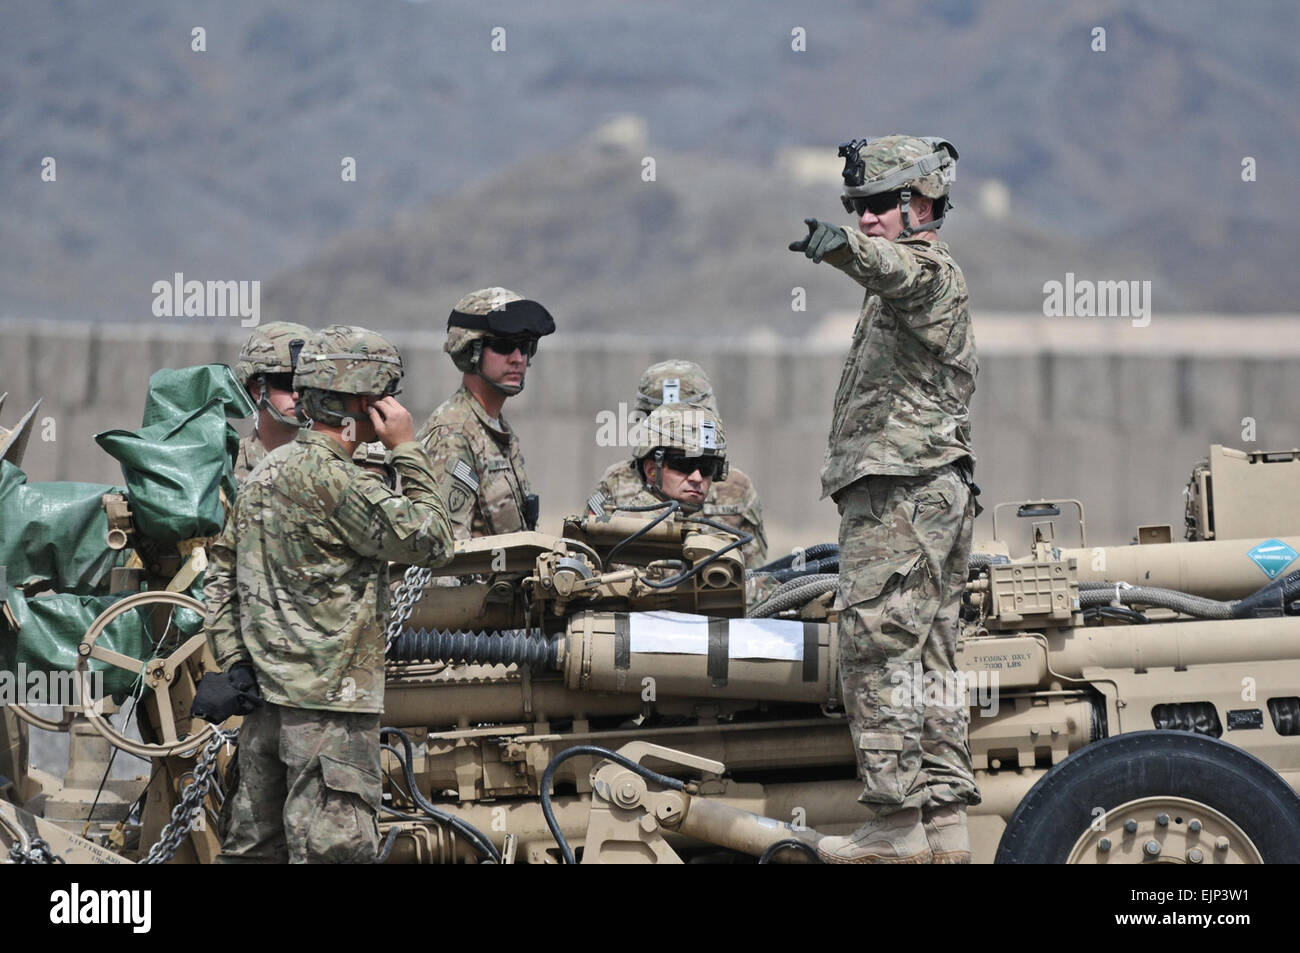 U.S. Army 1st Sgt. Michael Strate right, C-Battery, 1st Battalion Air Assault, 377th Field Artillery Regiment, Task Force Spartan Steel, prepares to transport the M777 howitzer from Forward Operating Base Salerno to Combat Outpost Chamkani March 28. L Spc. Eric-James Estrada Stock Photo